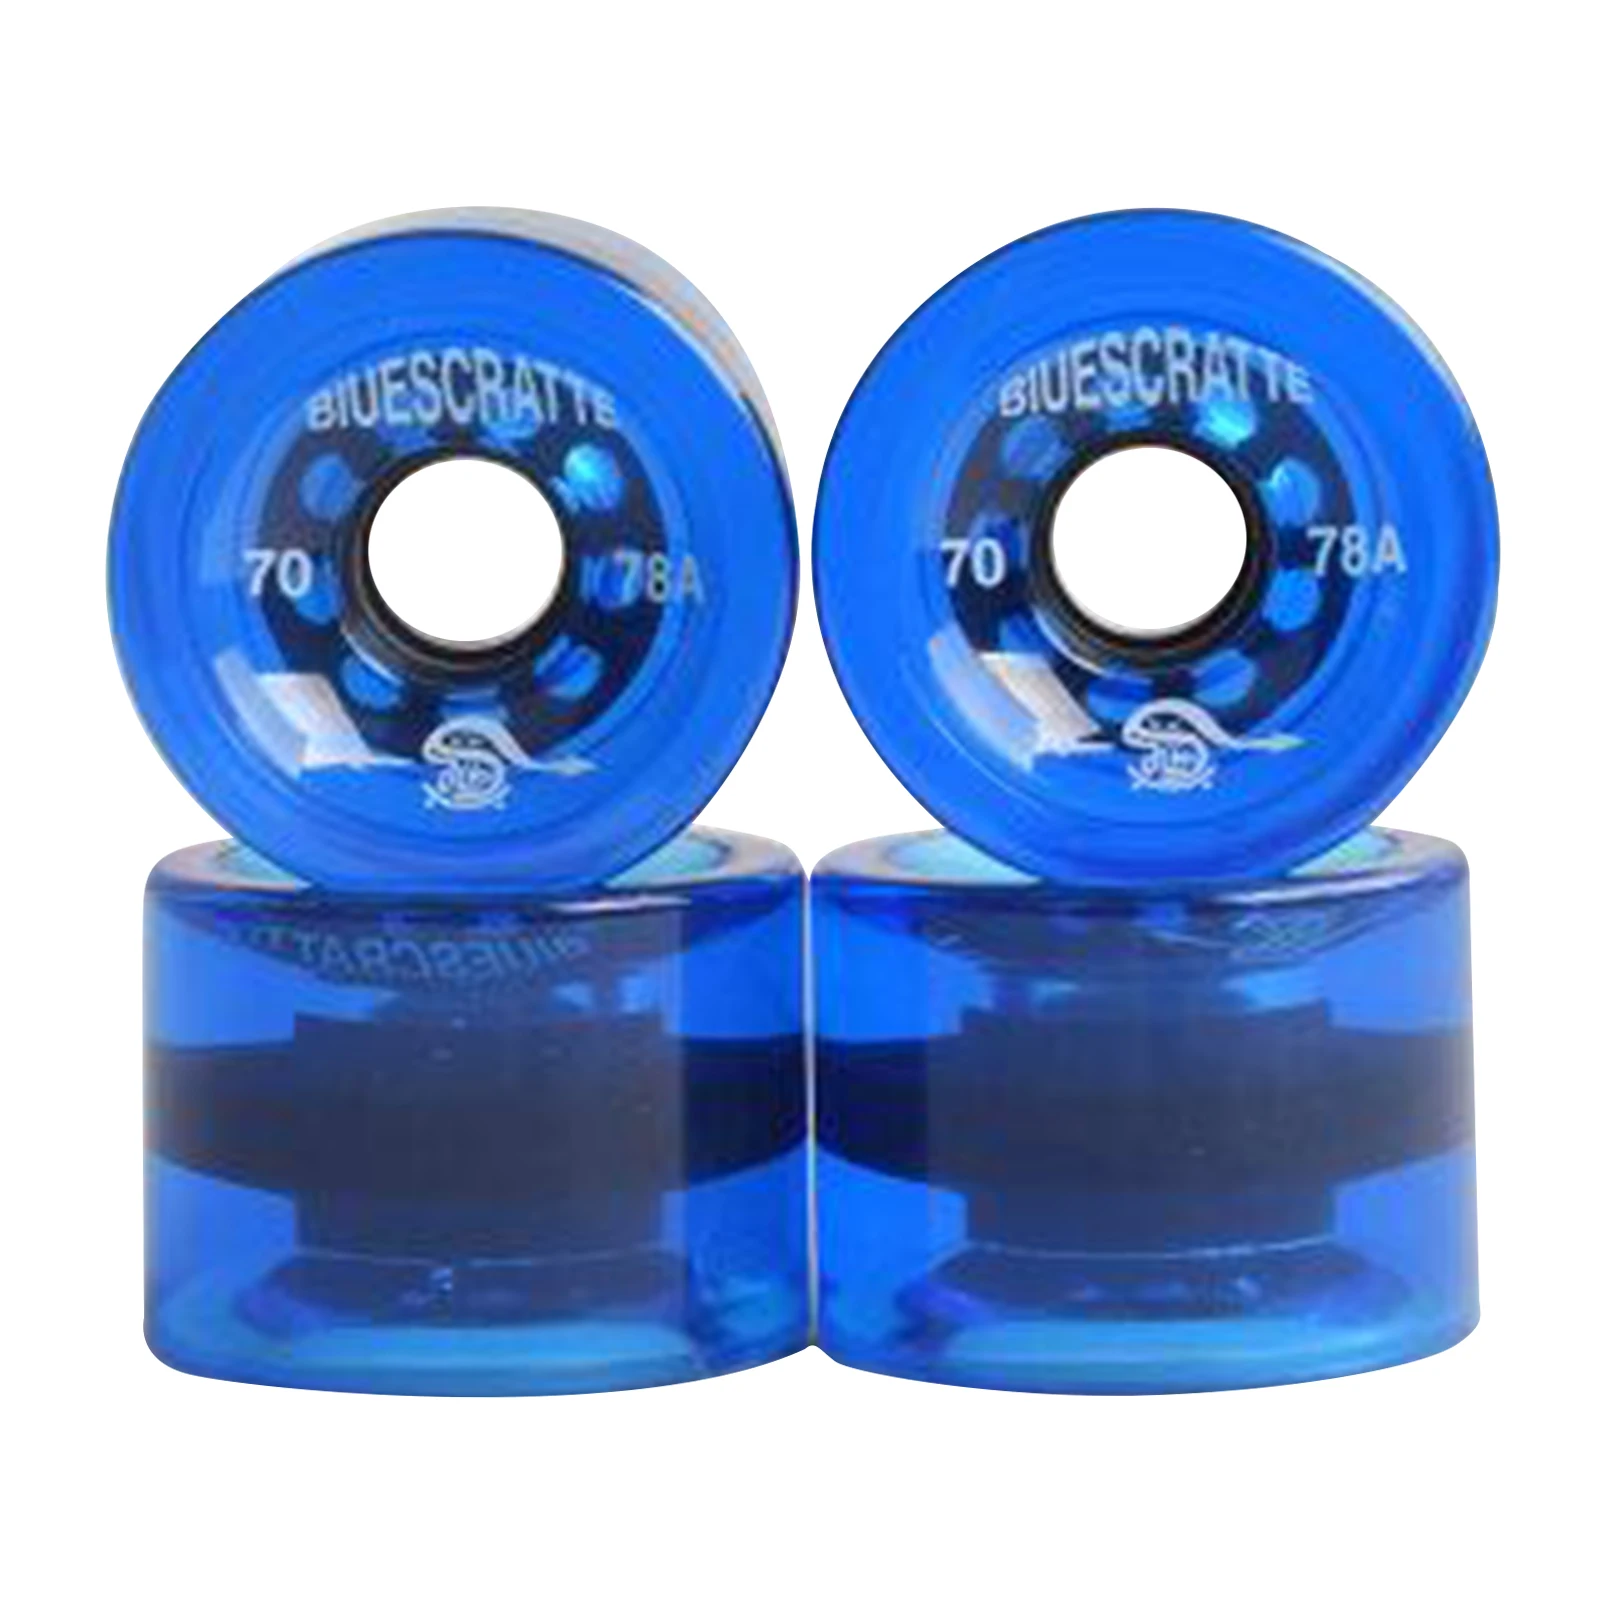 4pcs/Pack 70mm Longboard PU Wheel Replacement Skateboard 78A Hardness Wheels Cruising Wheel ABEC-9 Bearings Outer Cover